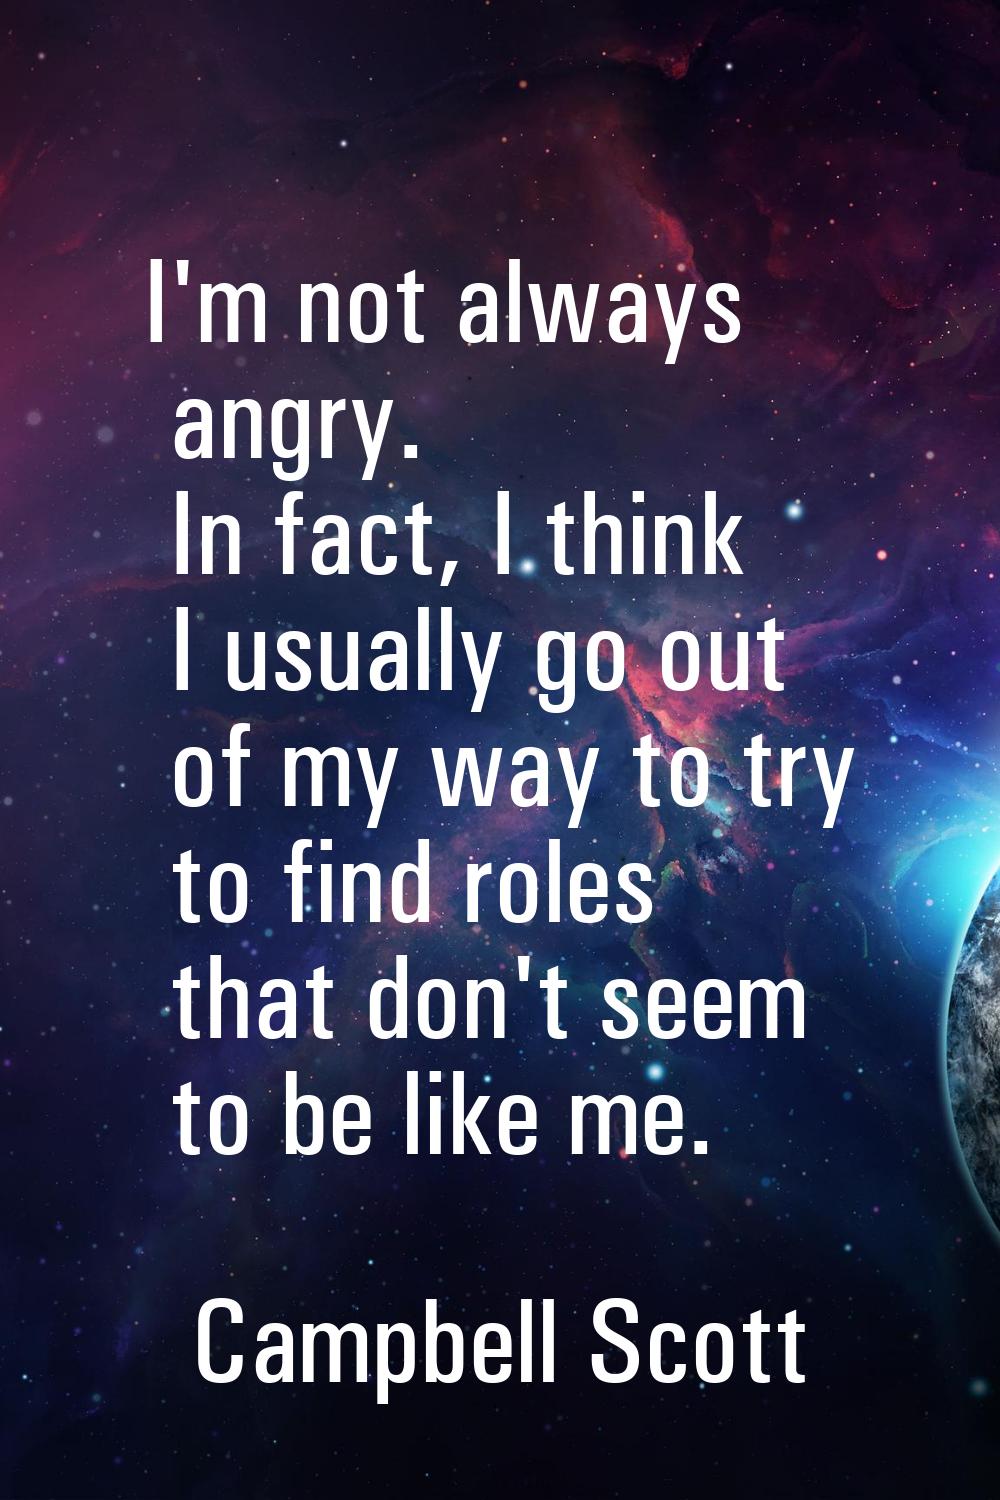 I'm not always angry. In fact, I think I usually go out of my way to try to find roles that don't s